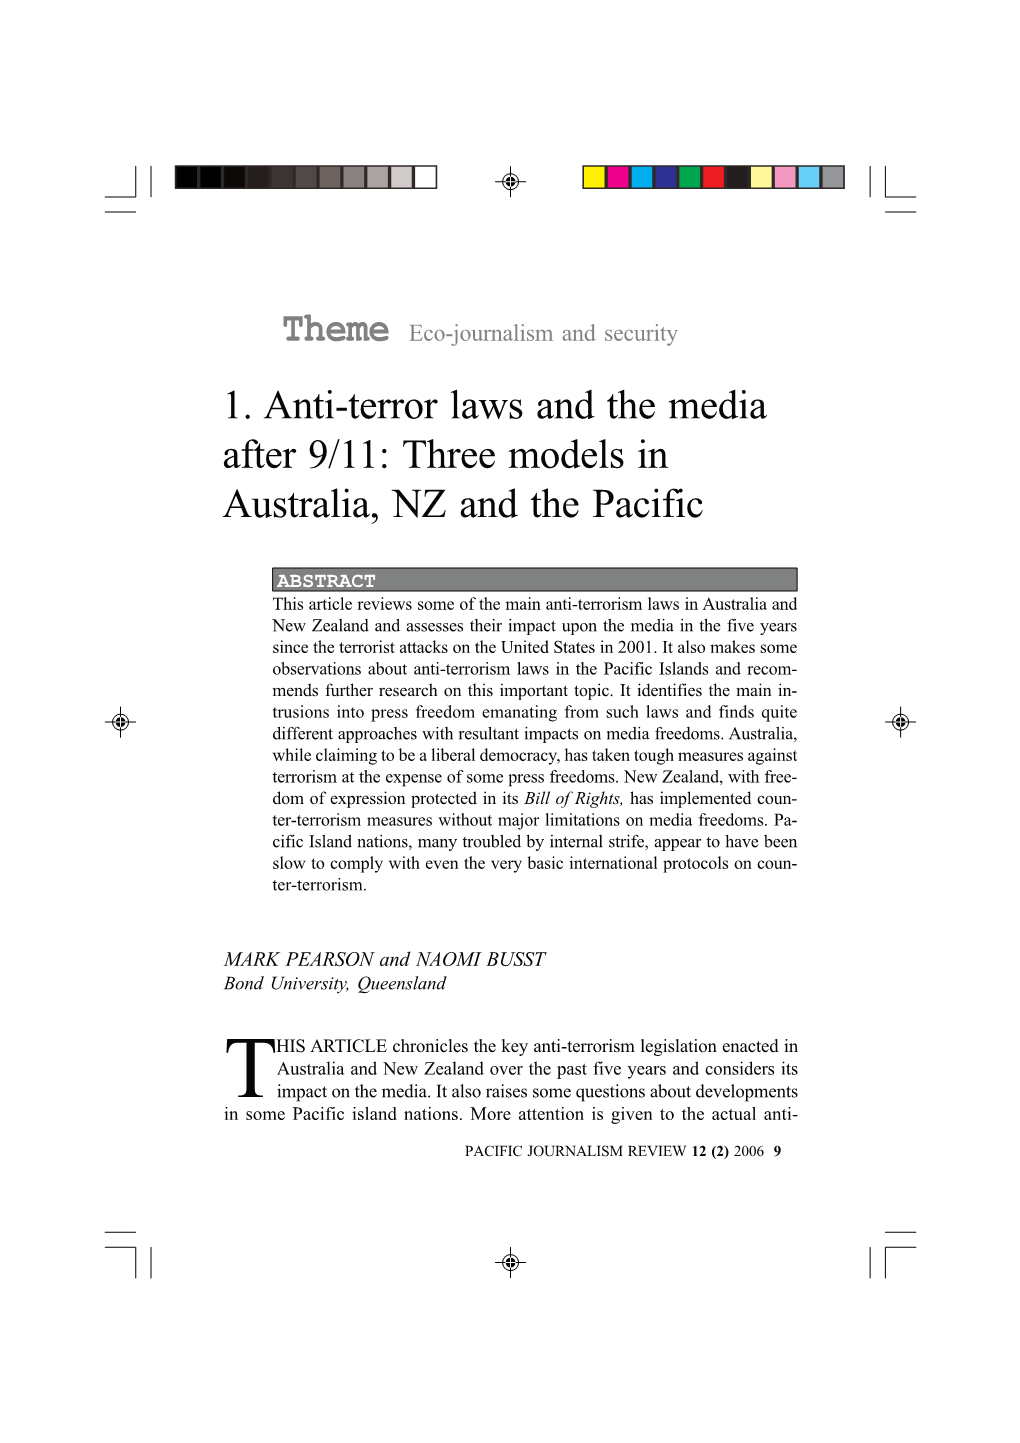 1. Anti-Terror Laws and the Media After 9/11: Three Models in Australia, NZ and the Pacific